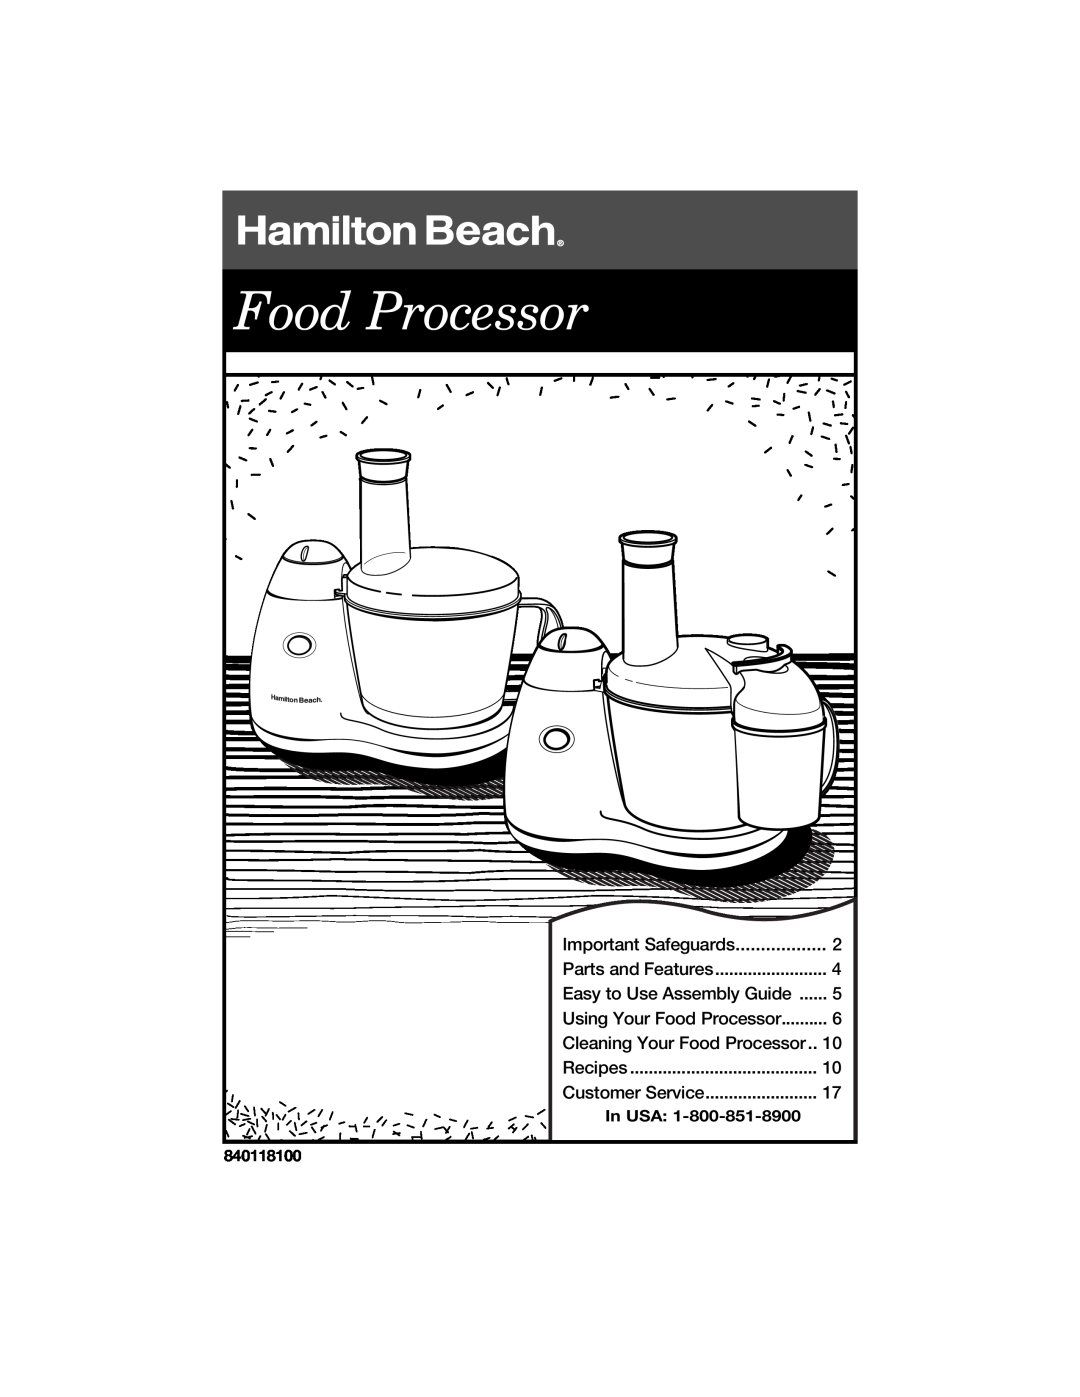 Hamilton Beach 840118100 manual Important Safeguards, Cleaning Your Food Processor, In USA 